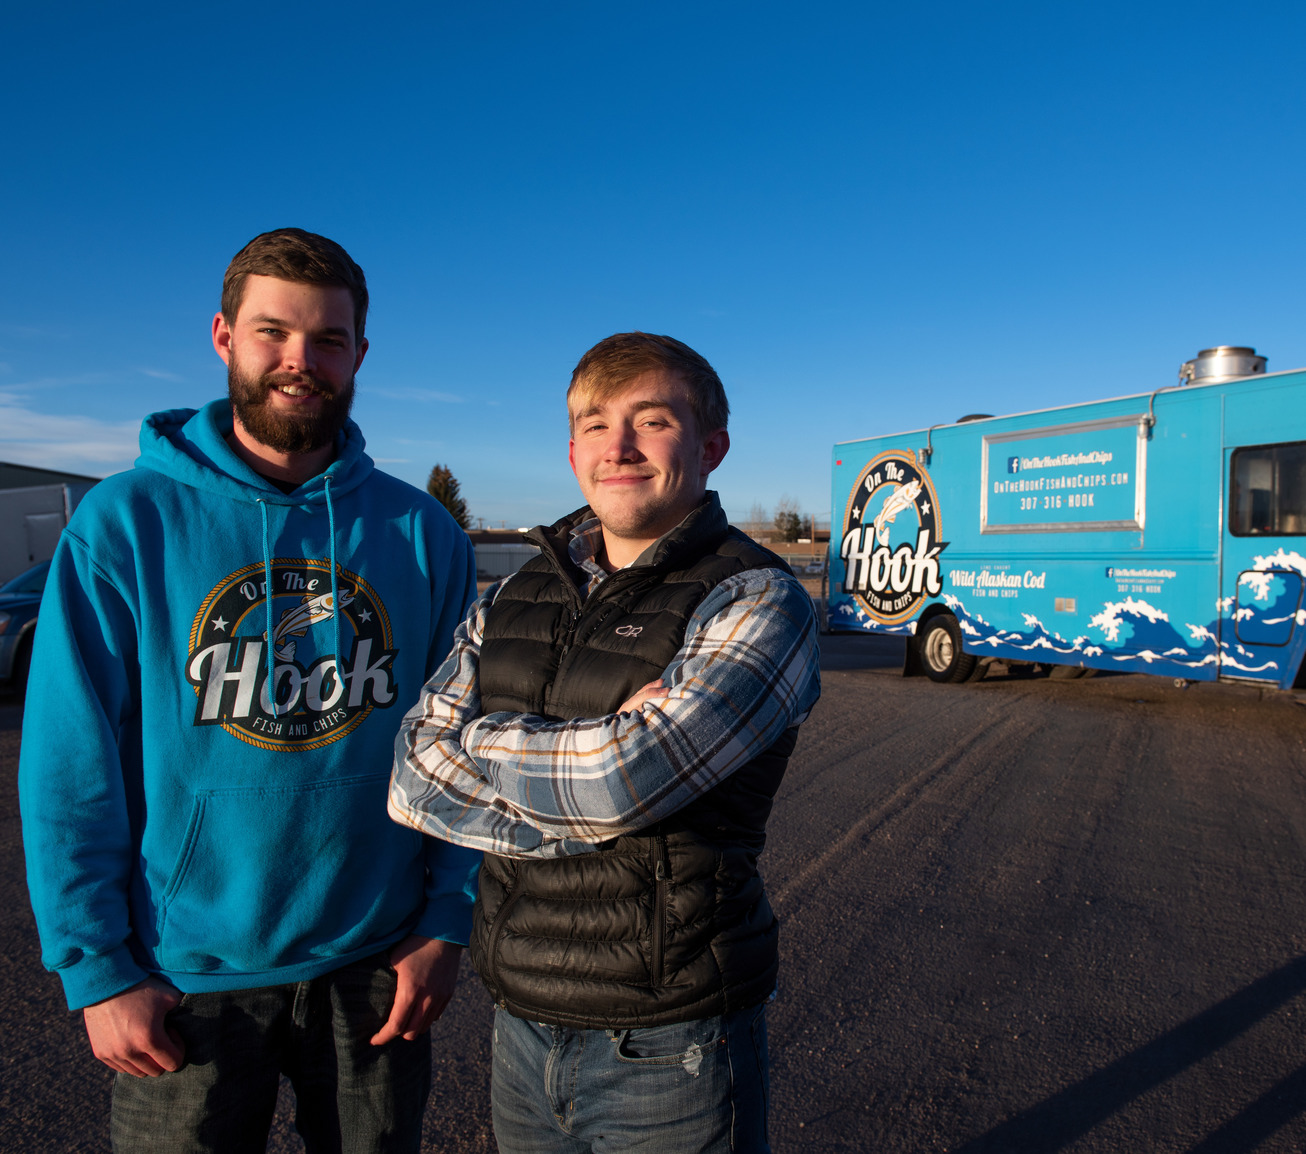 Two former UW students pose in front of their On the Hook food truck.